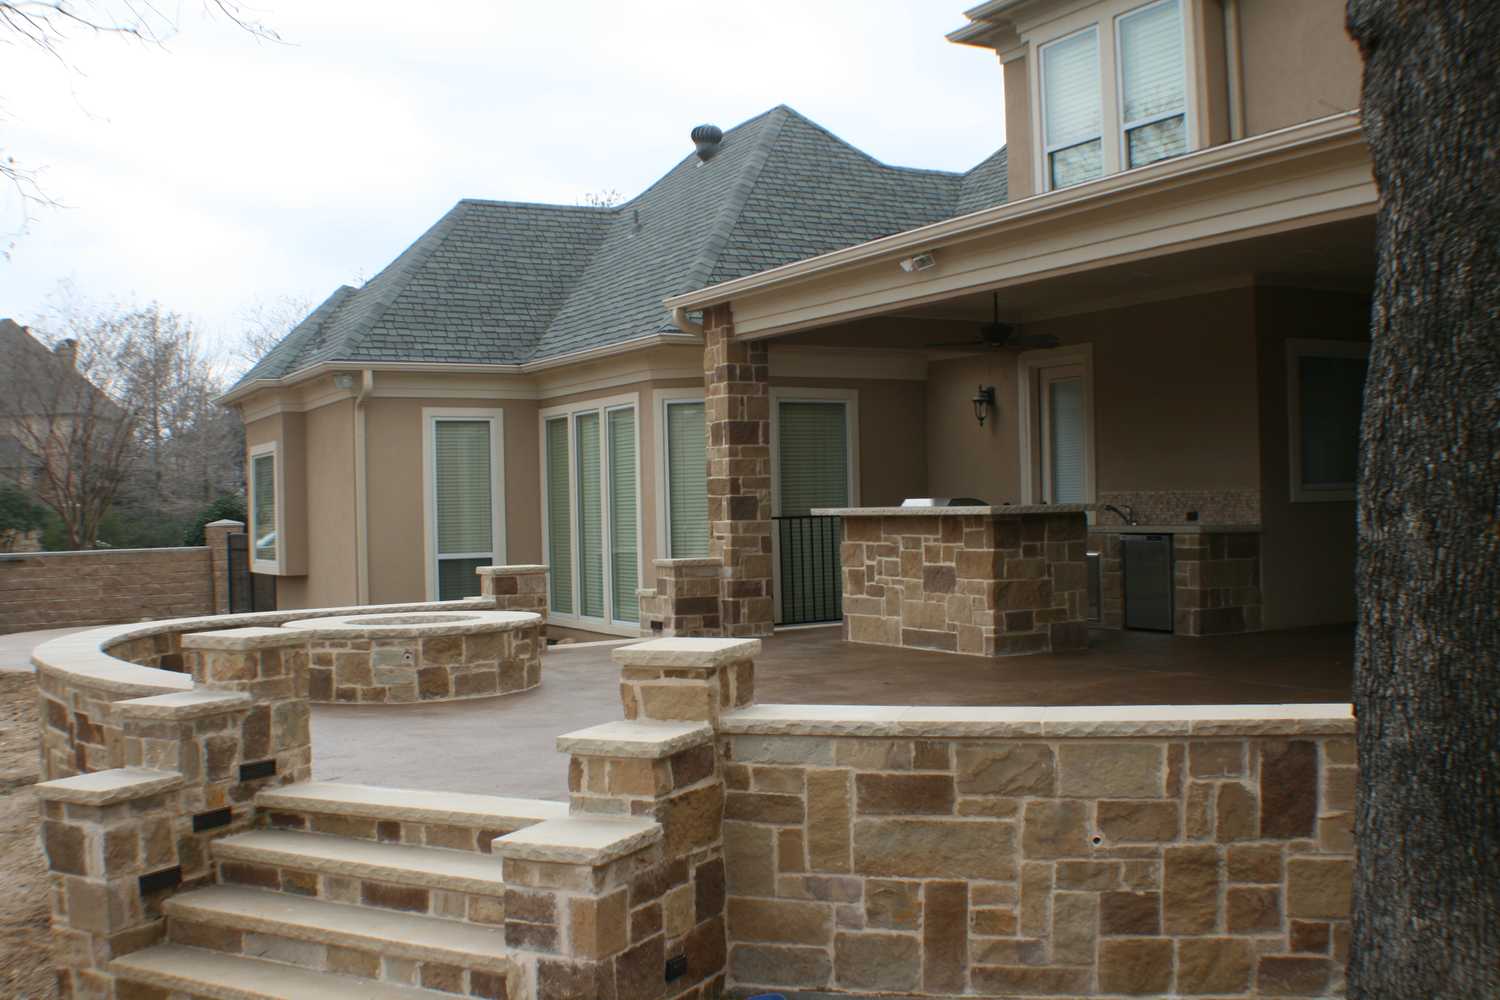 Patios and Hardscapes